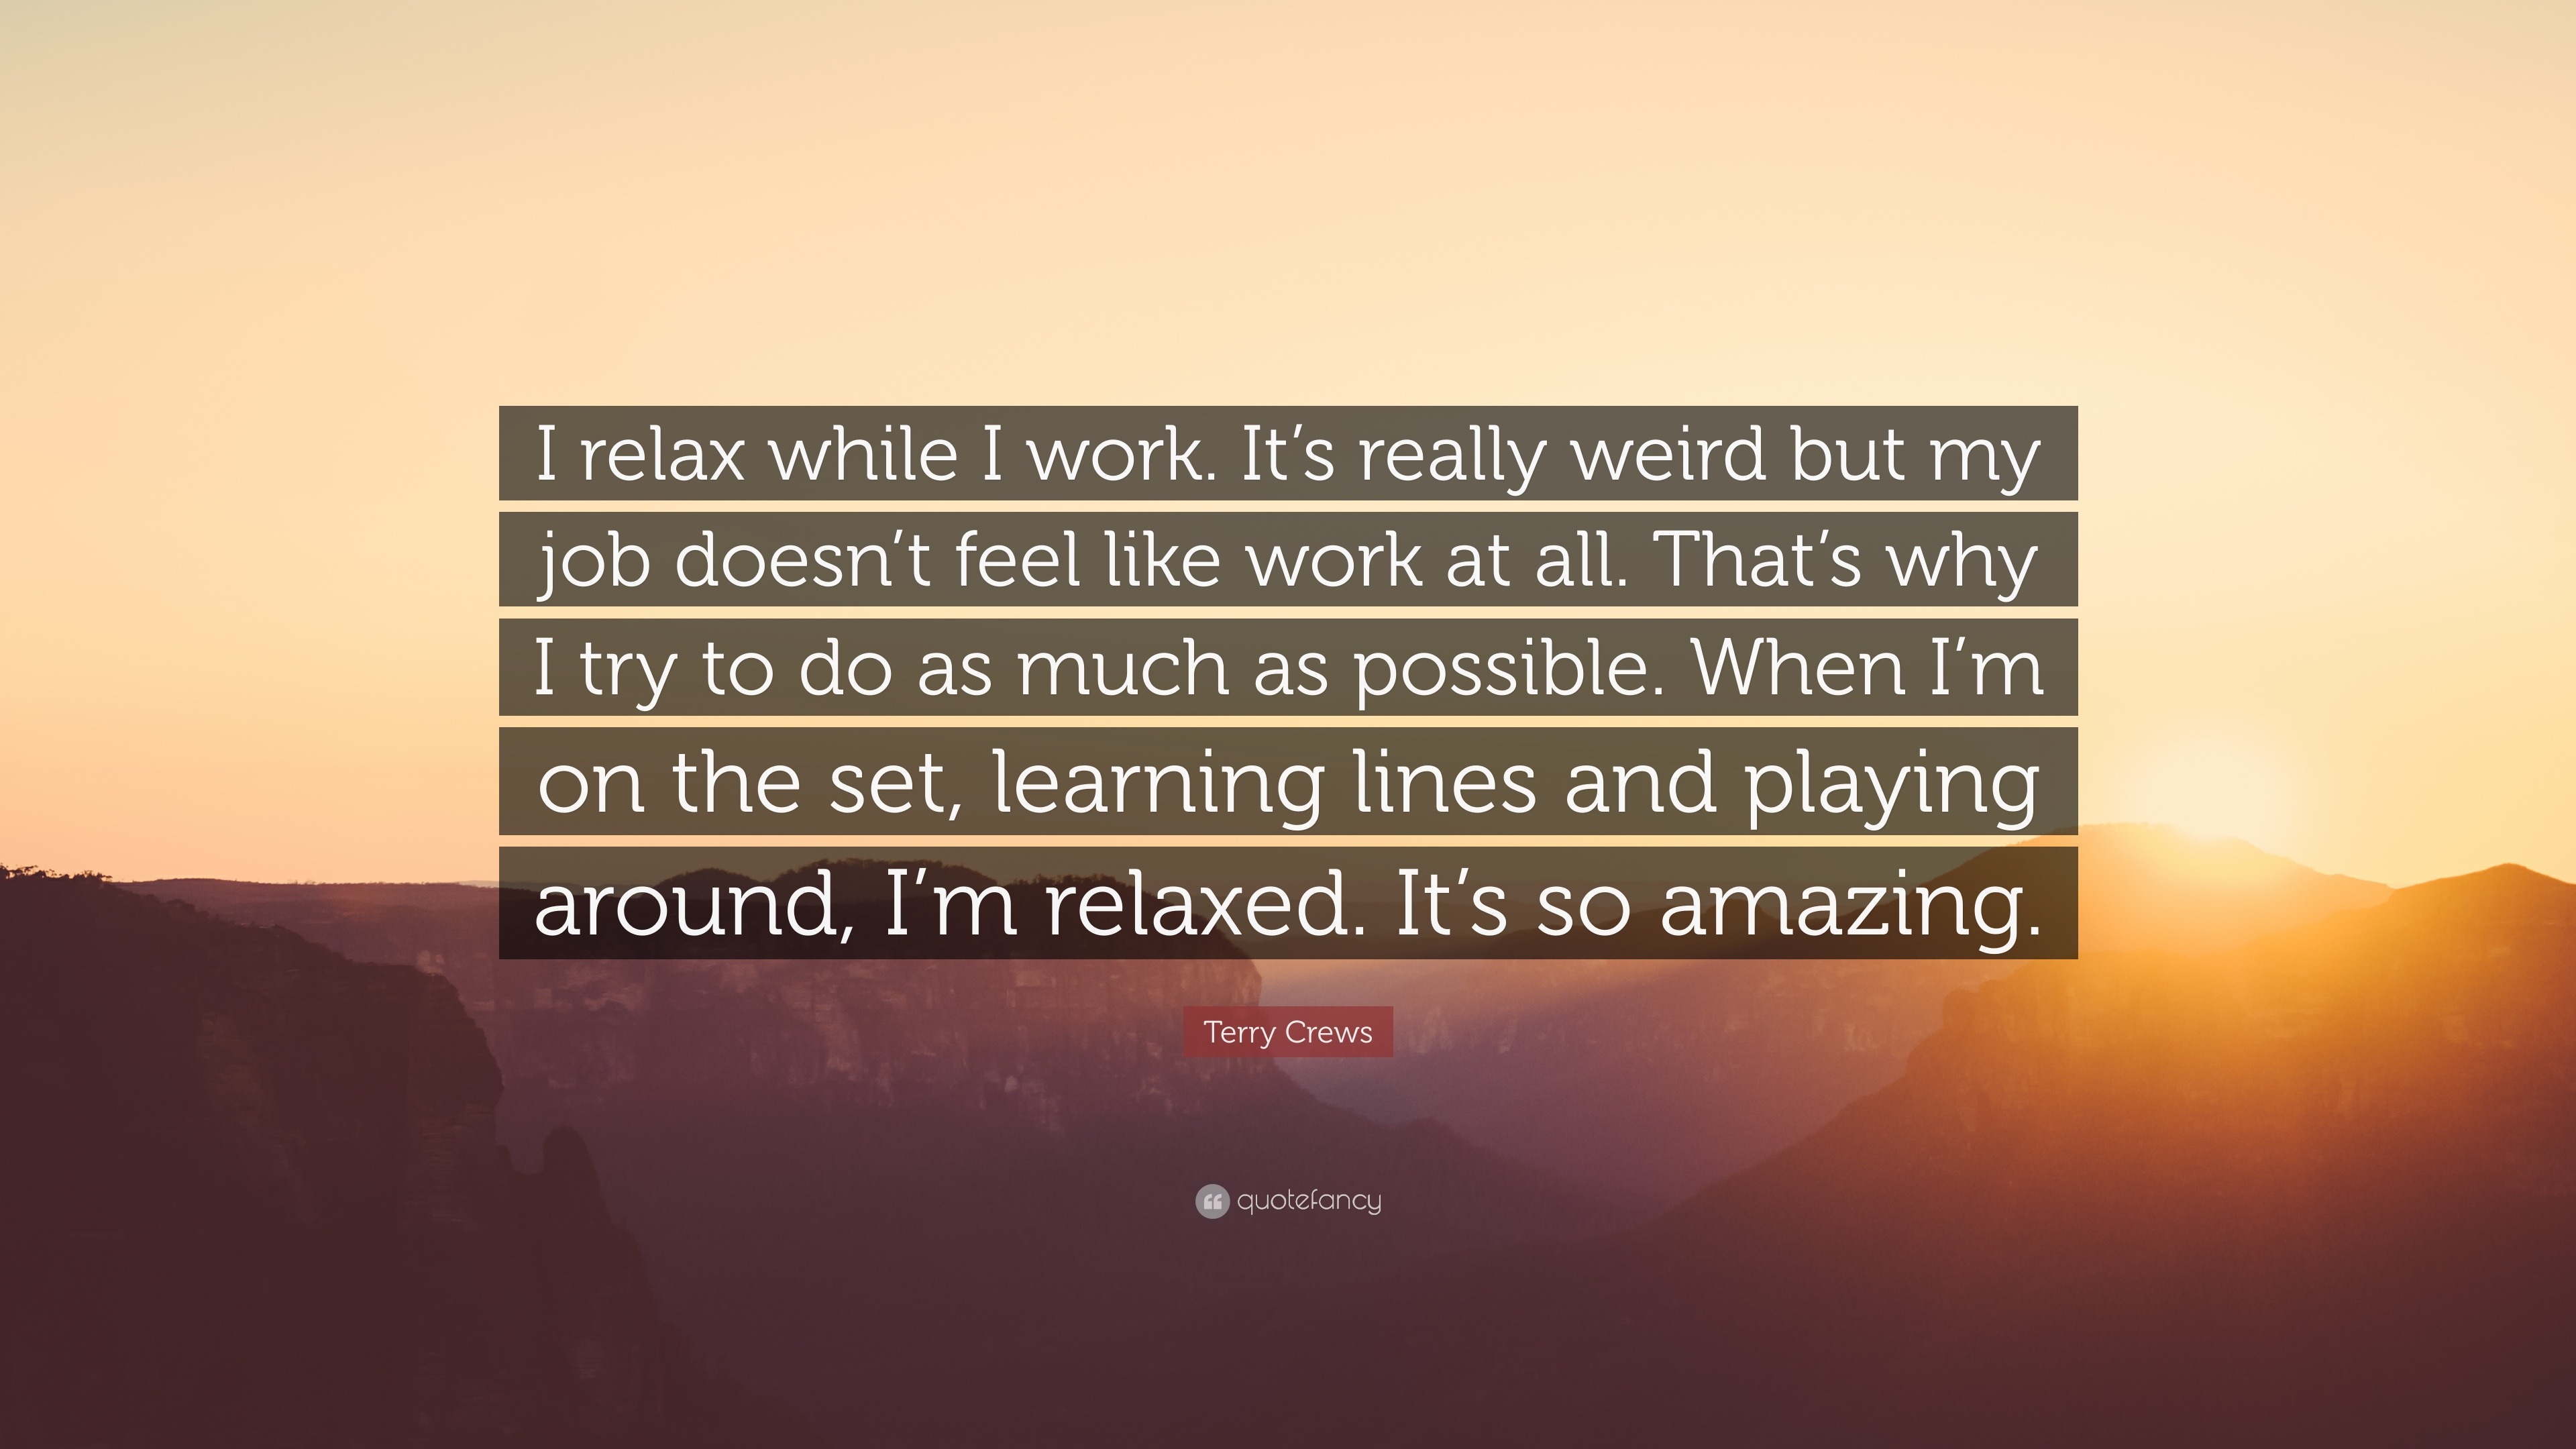 Terry Crews Quote I Relax While I Work Its Really Weird But My Job Doesnt Feel Like Work At